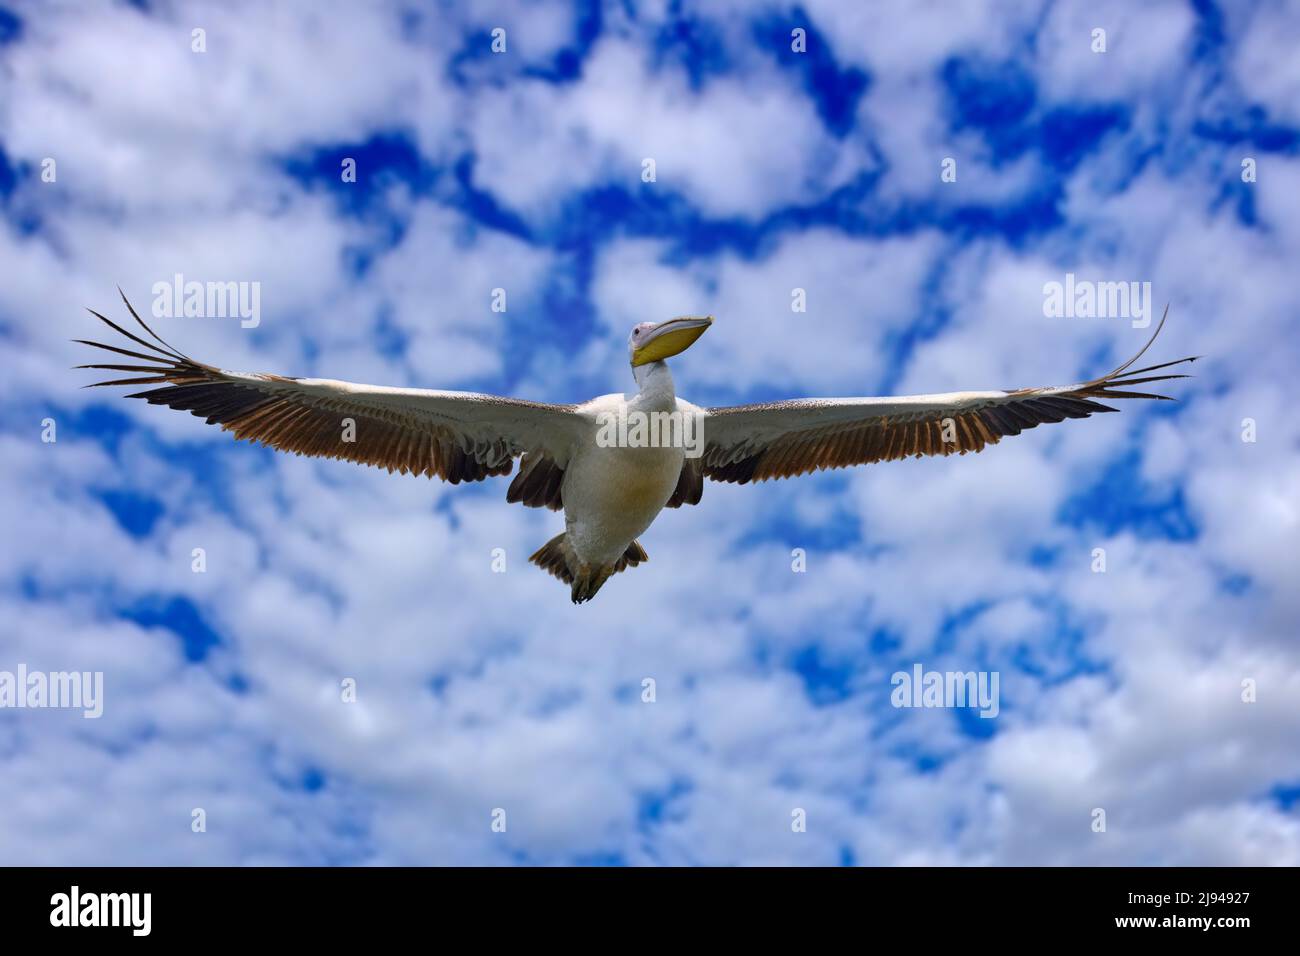 Pelican fly on the blue sky with white clouds. Great white pelican, Pelecanus onocrotalus. Detail bill portrait of pelican, Uganda in Africa. Wildlife Stock Photo